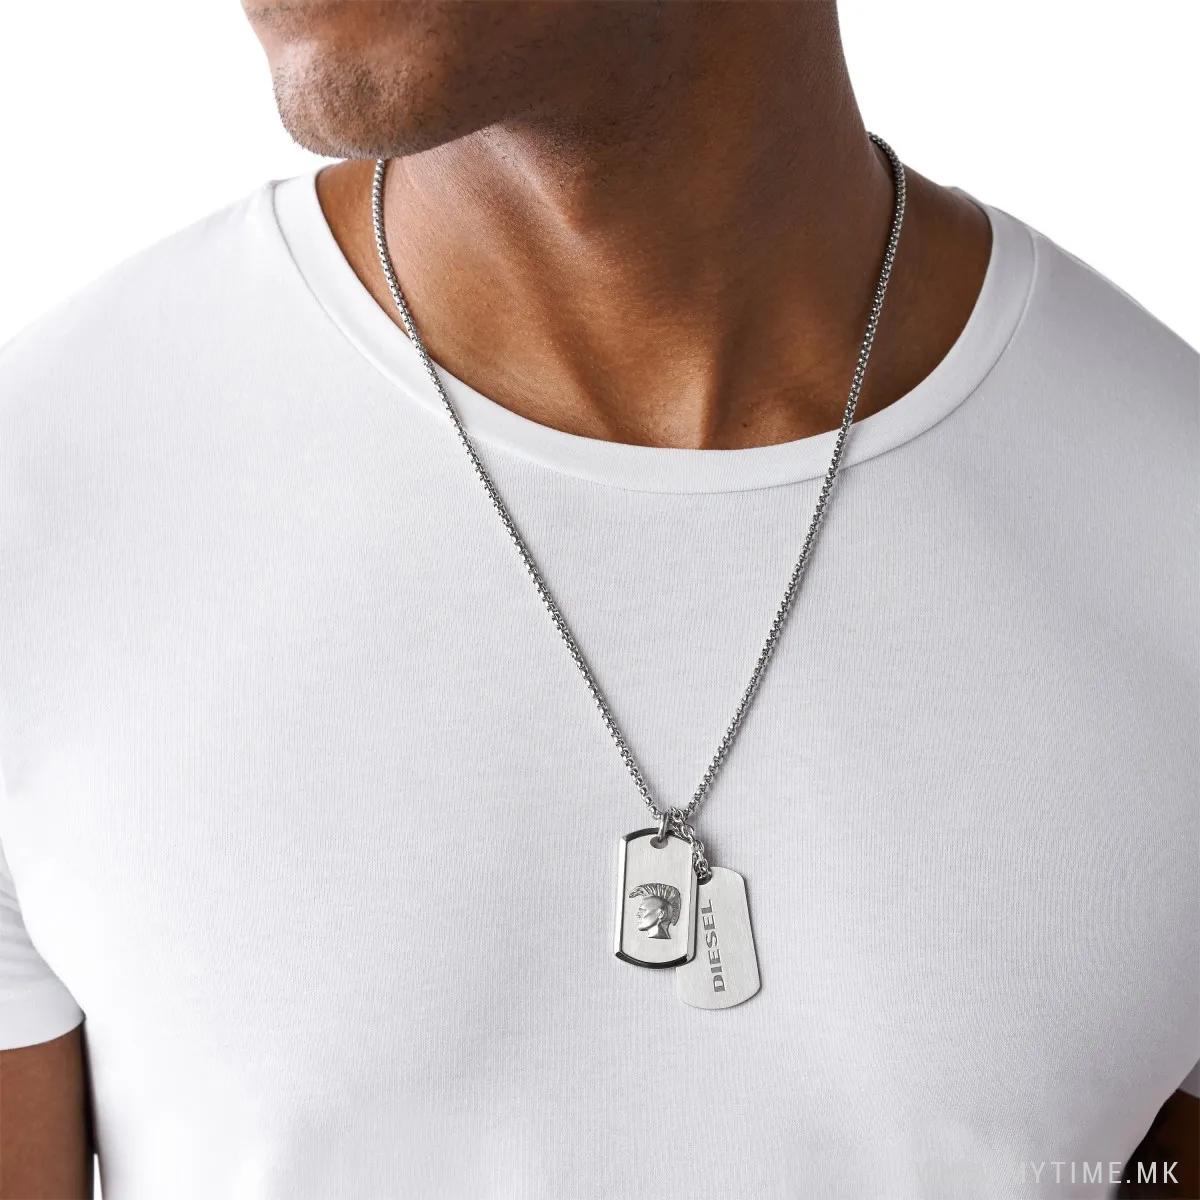 DX1210040 DOUBLE DOGTAGS 